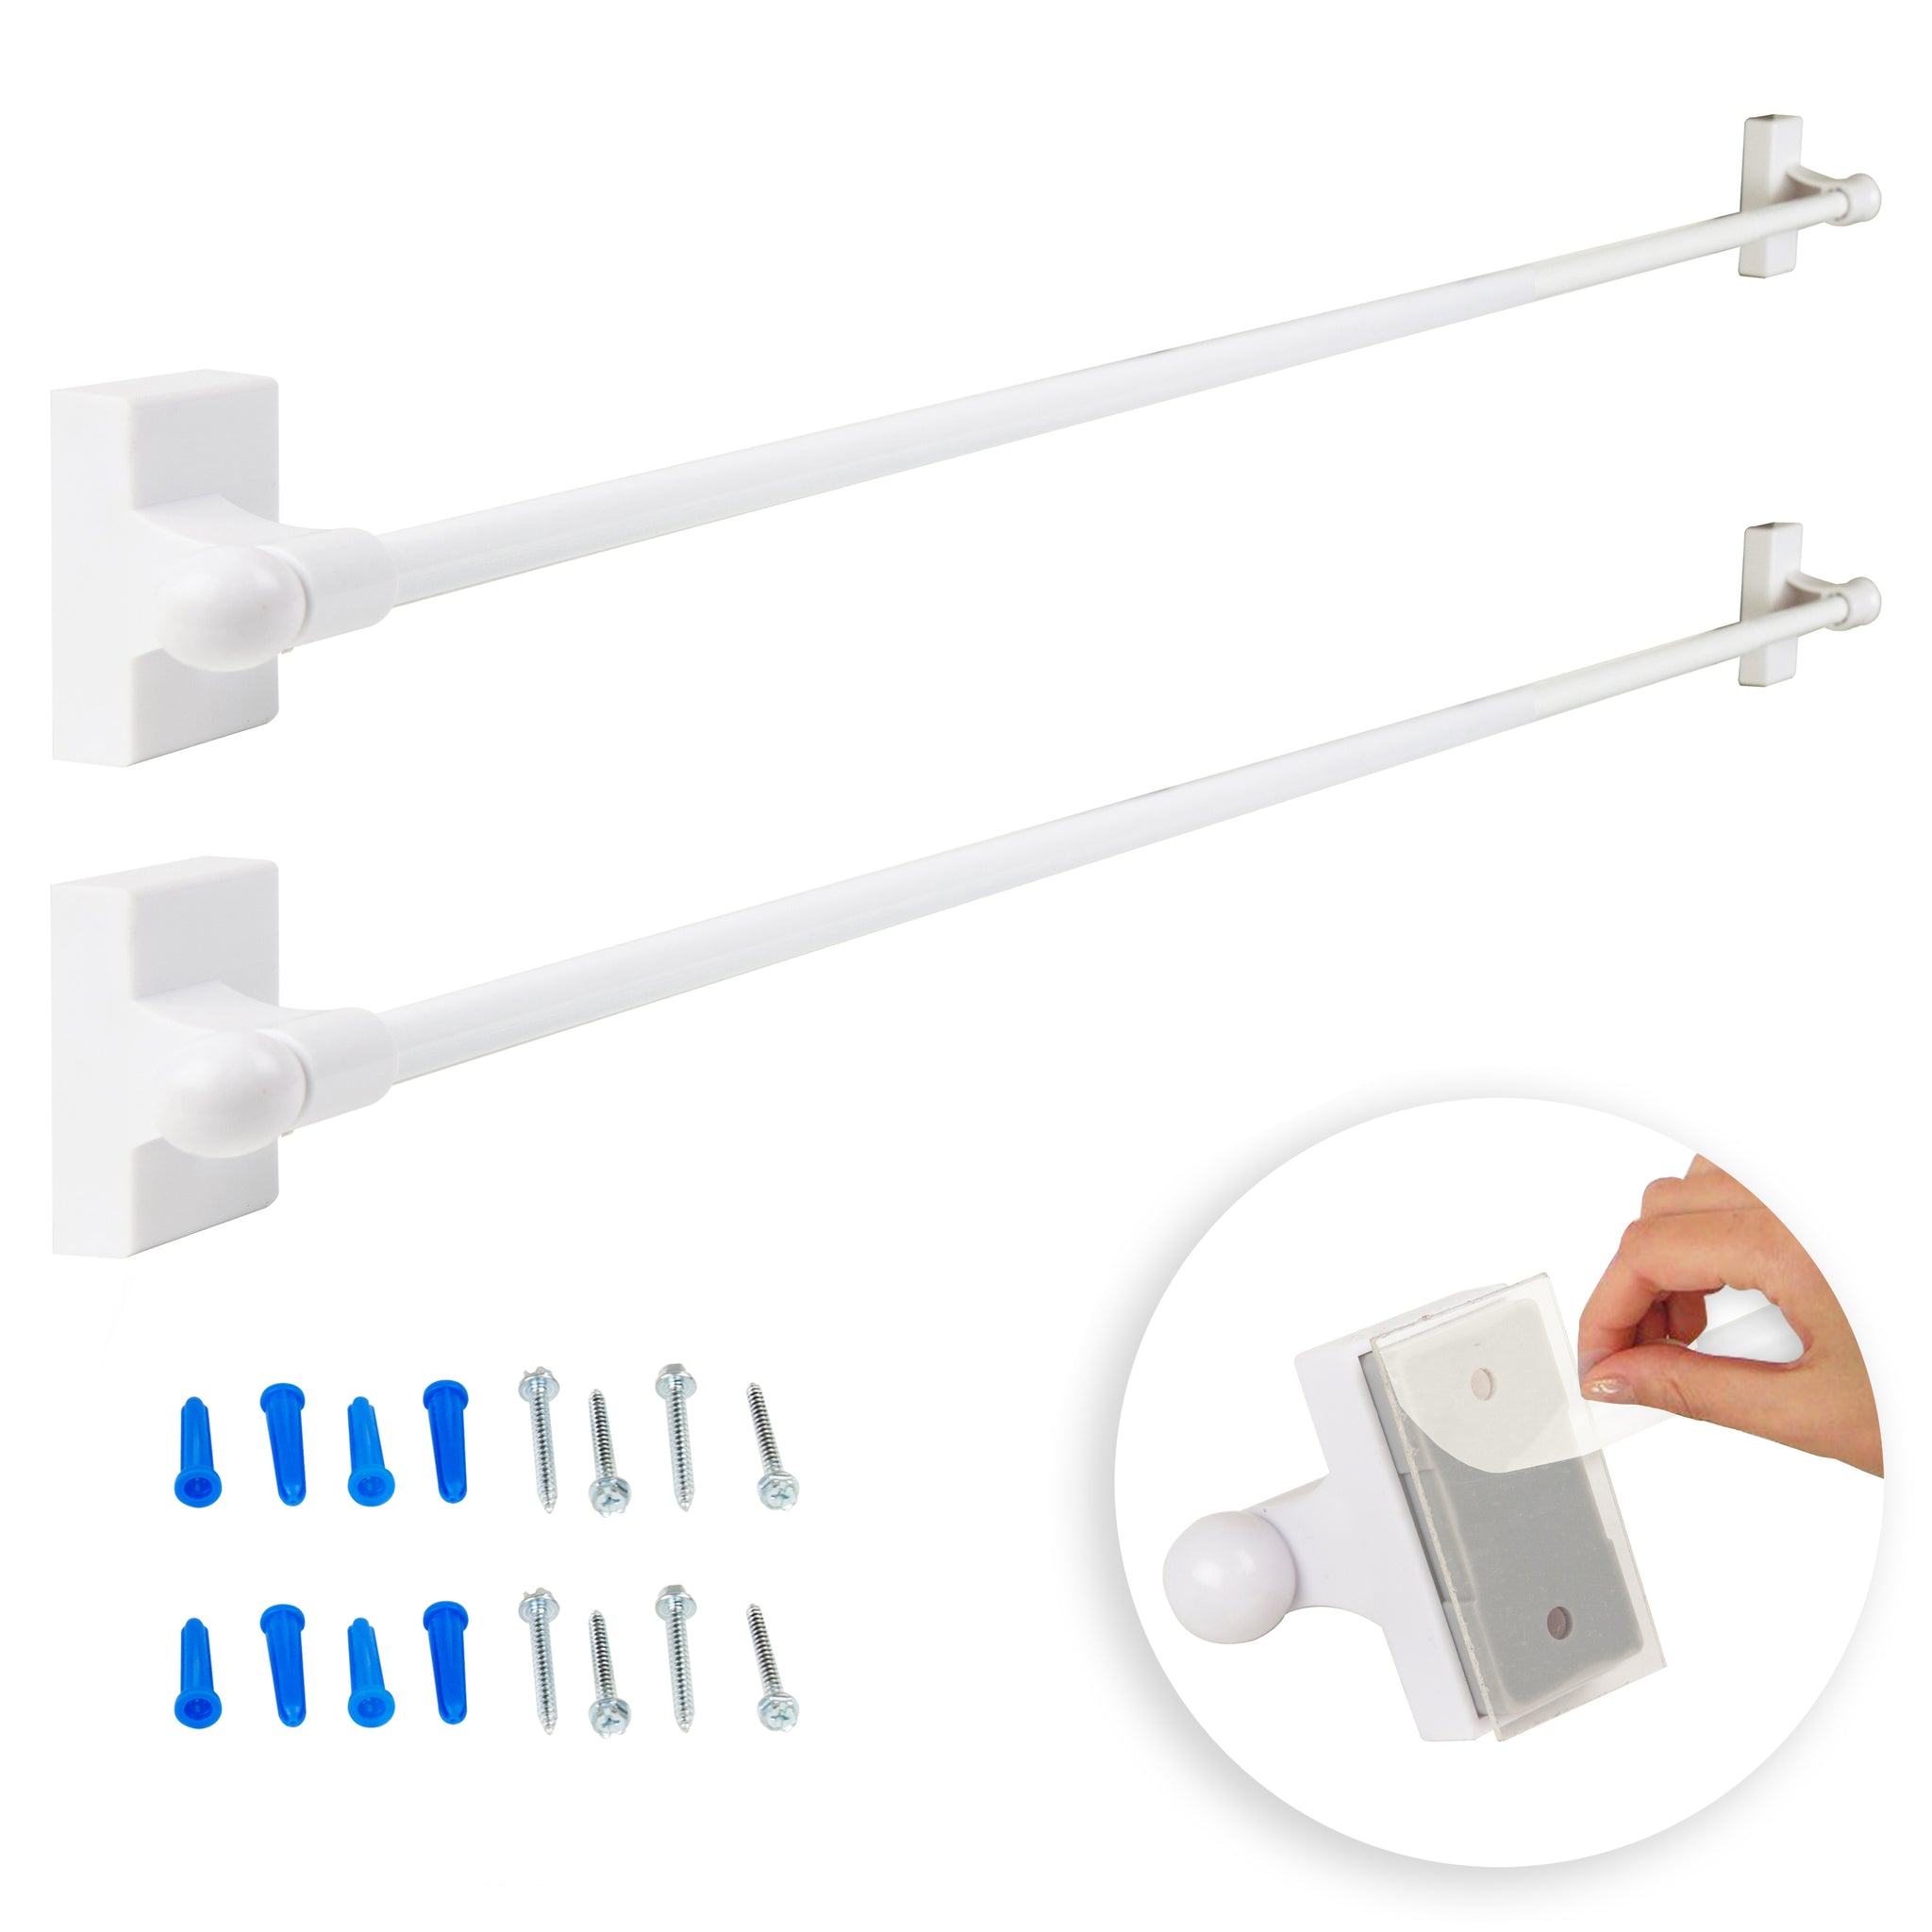 Self-adhesive or Wall Mounted Rod 17-30 inch (Set of 2)